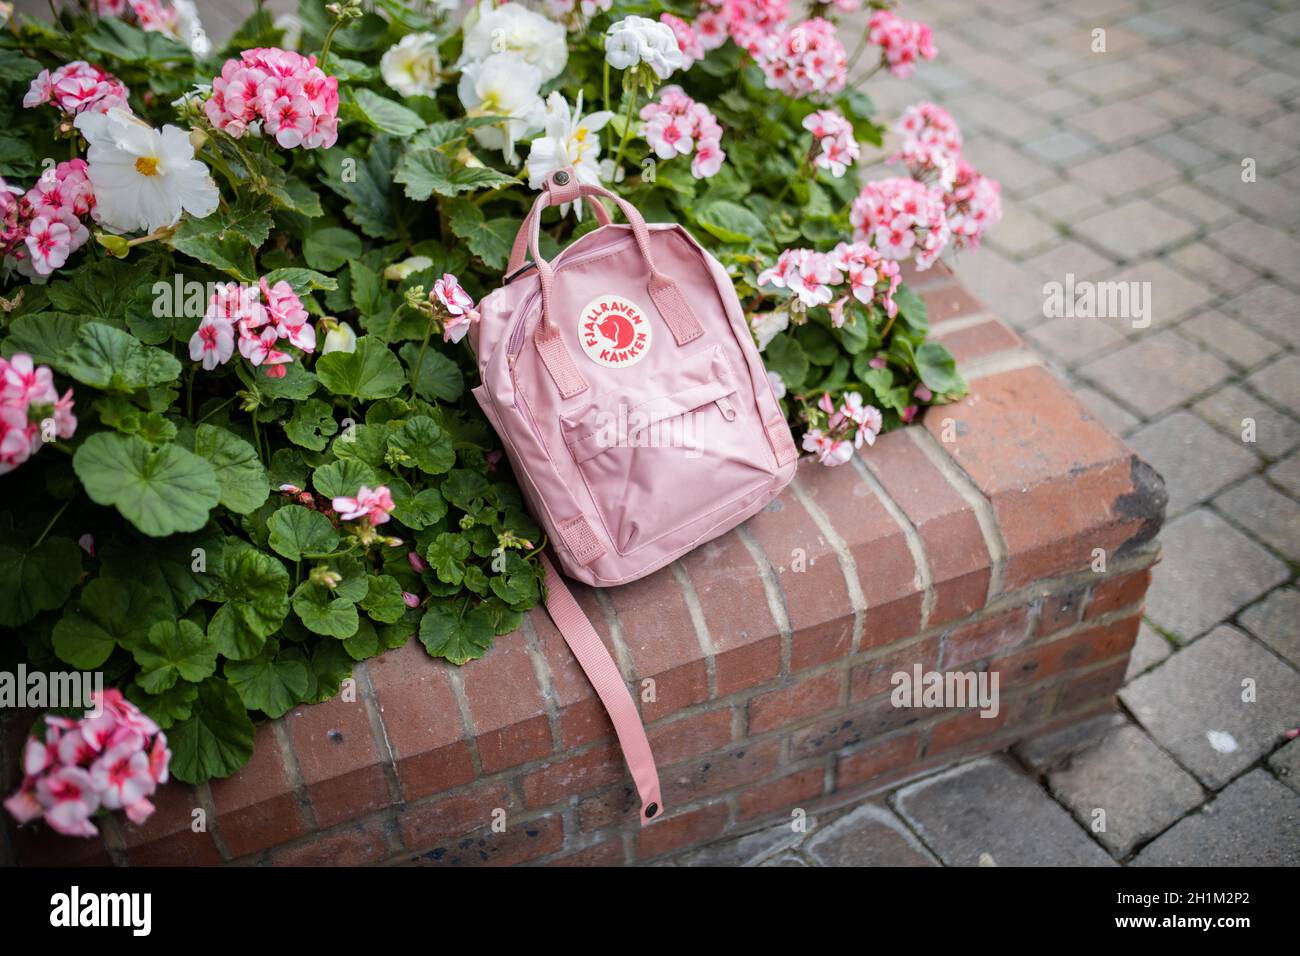 London, UK - November 4, 2020: Small pink Fjallraven backpack on brick planter with plants and pink flowers. Pink rucksack and colorful flowers on bri Stock Photo